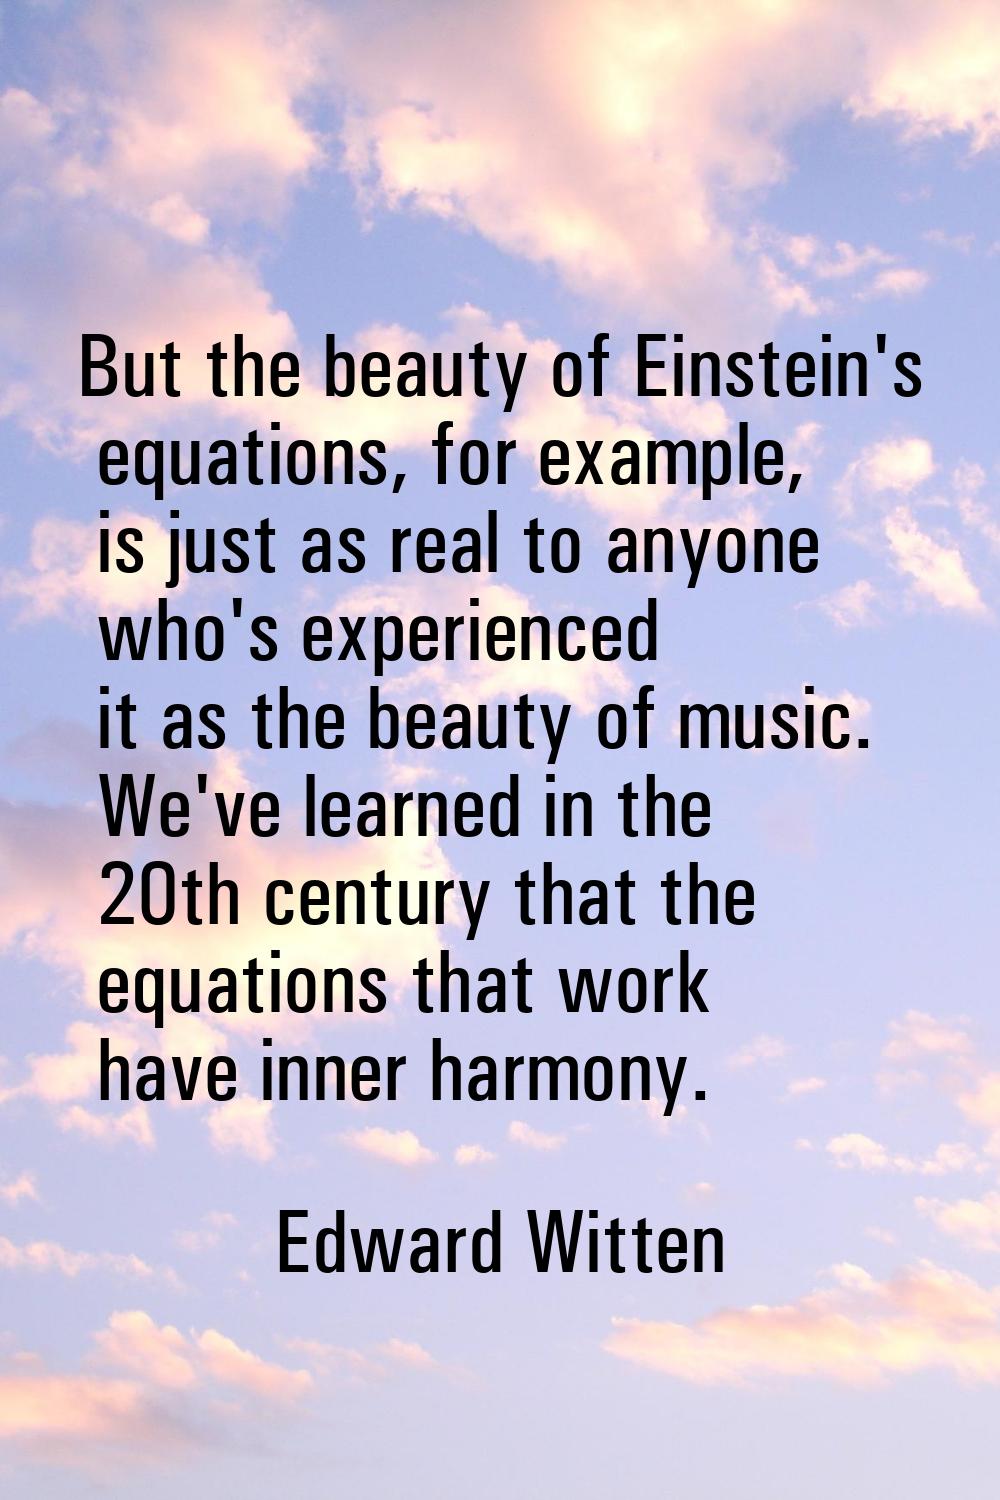 But the beauty of Einstein's equations, for example, is just as real to anyone who's experienced it